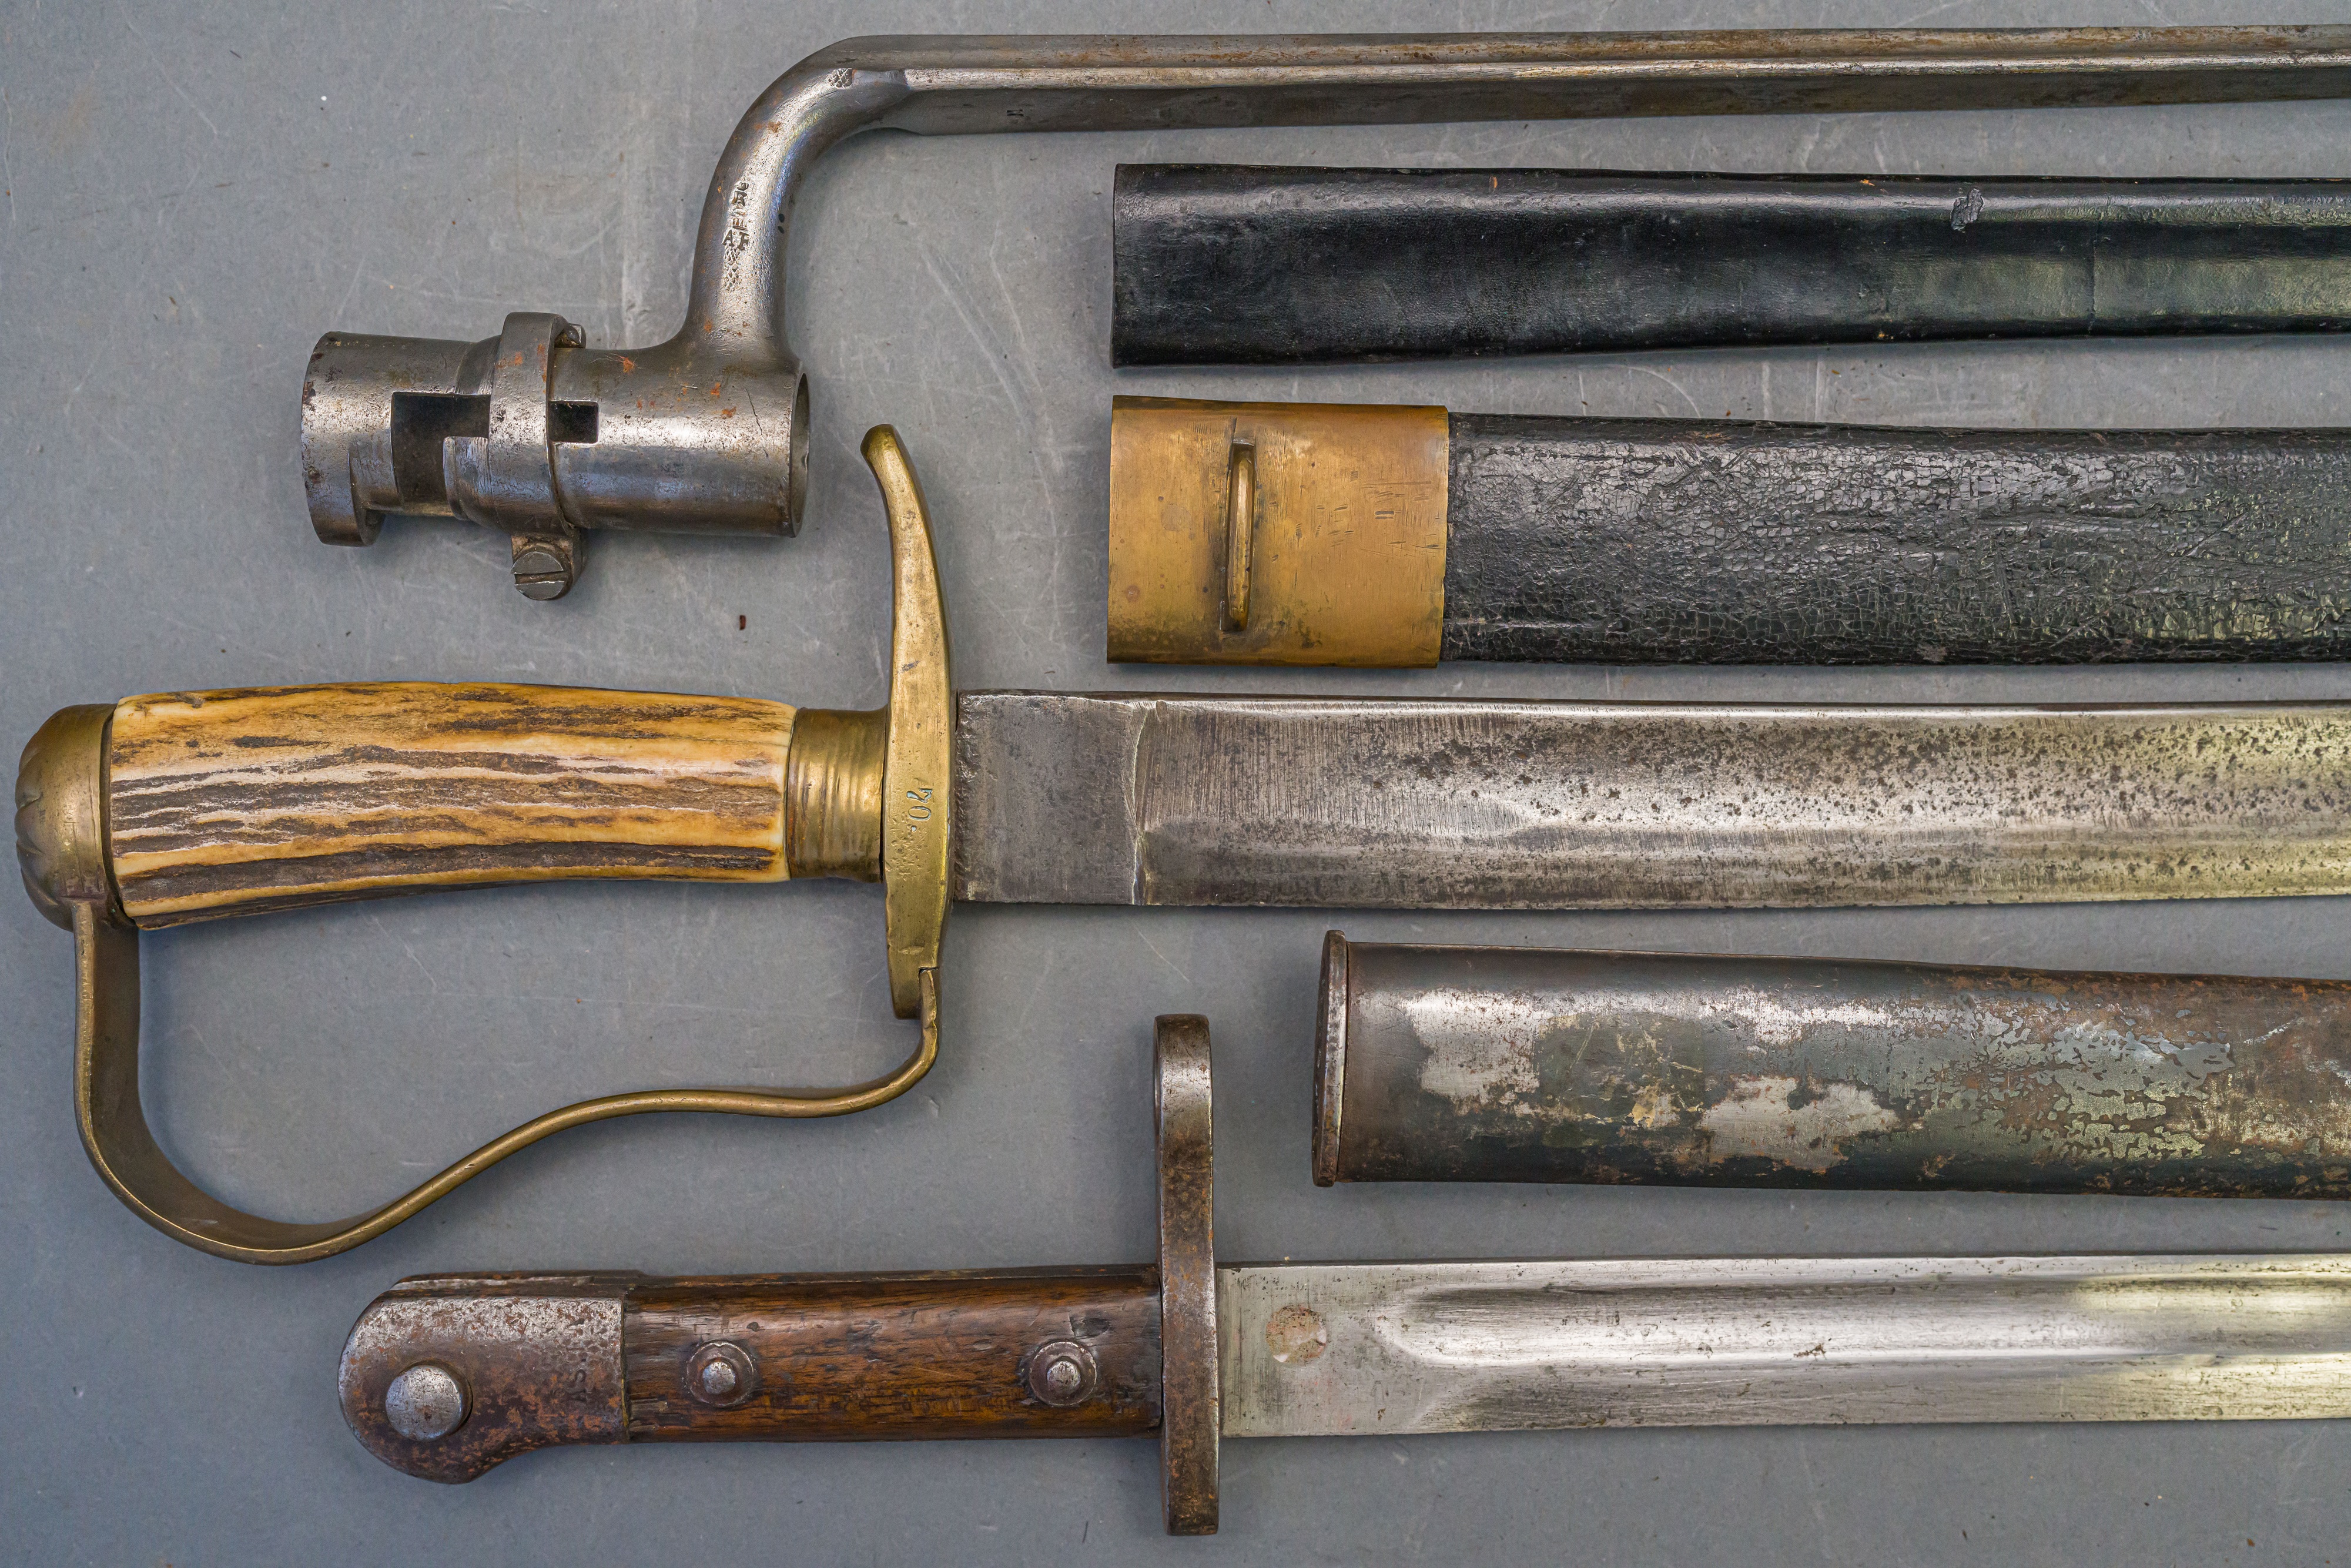 A MILITARY SHORTSWORD AND TWO BAYONETS, LATE 19TH CENTURY - Image 3 of 8